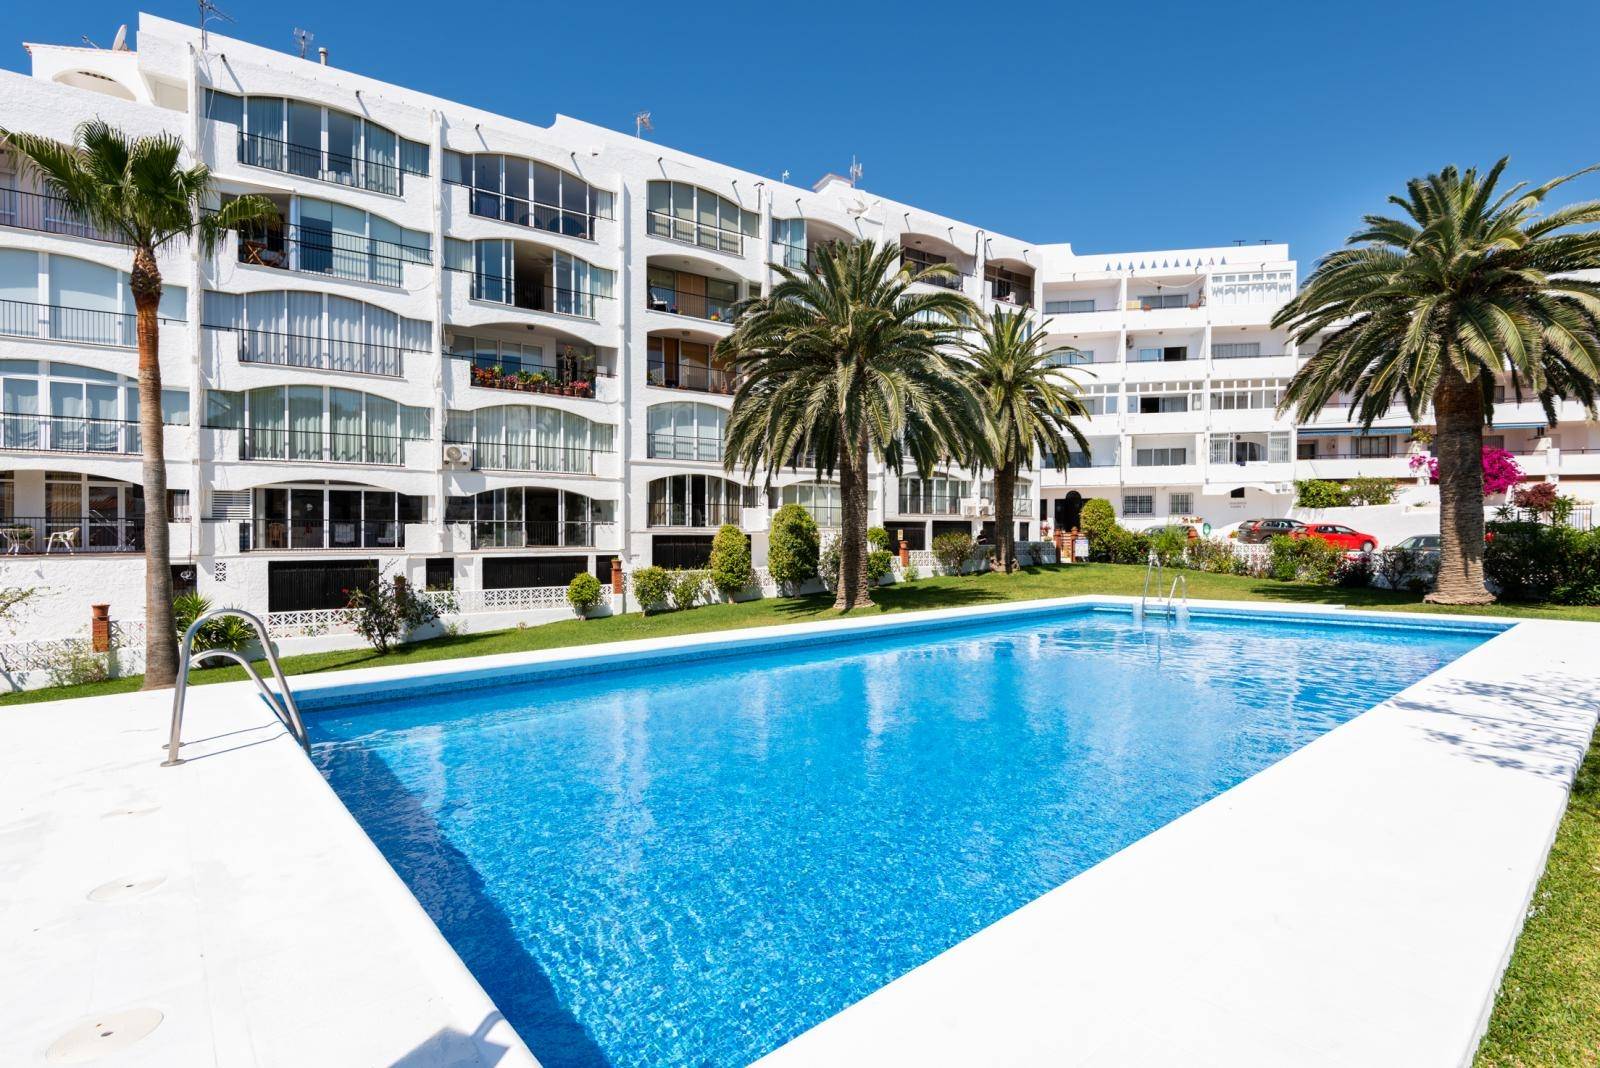 Apartment for sale in Nerja, Hotel Parador & Carabeo area